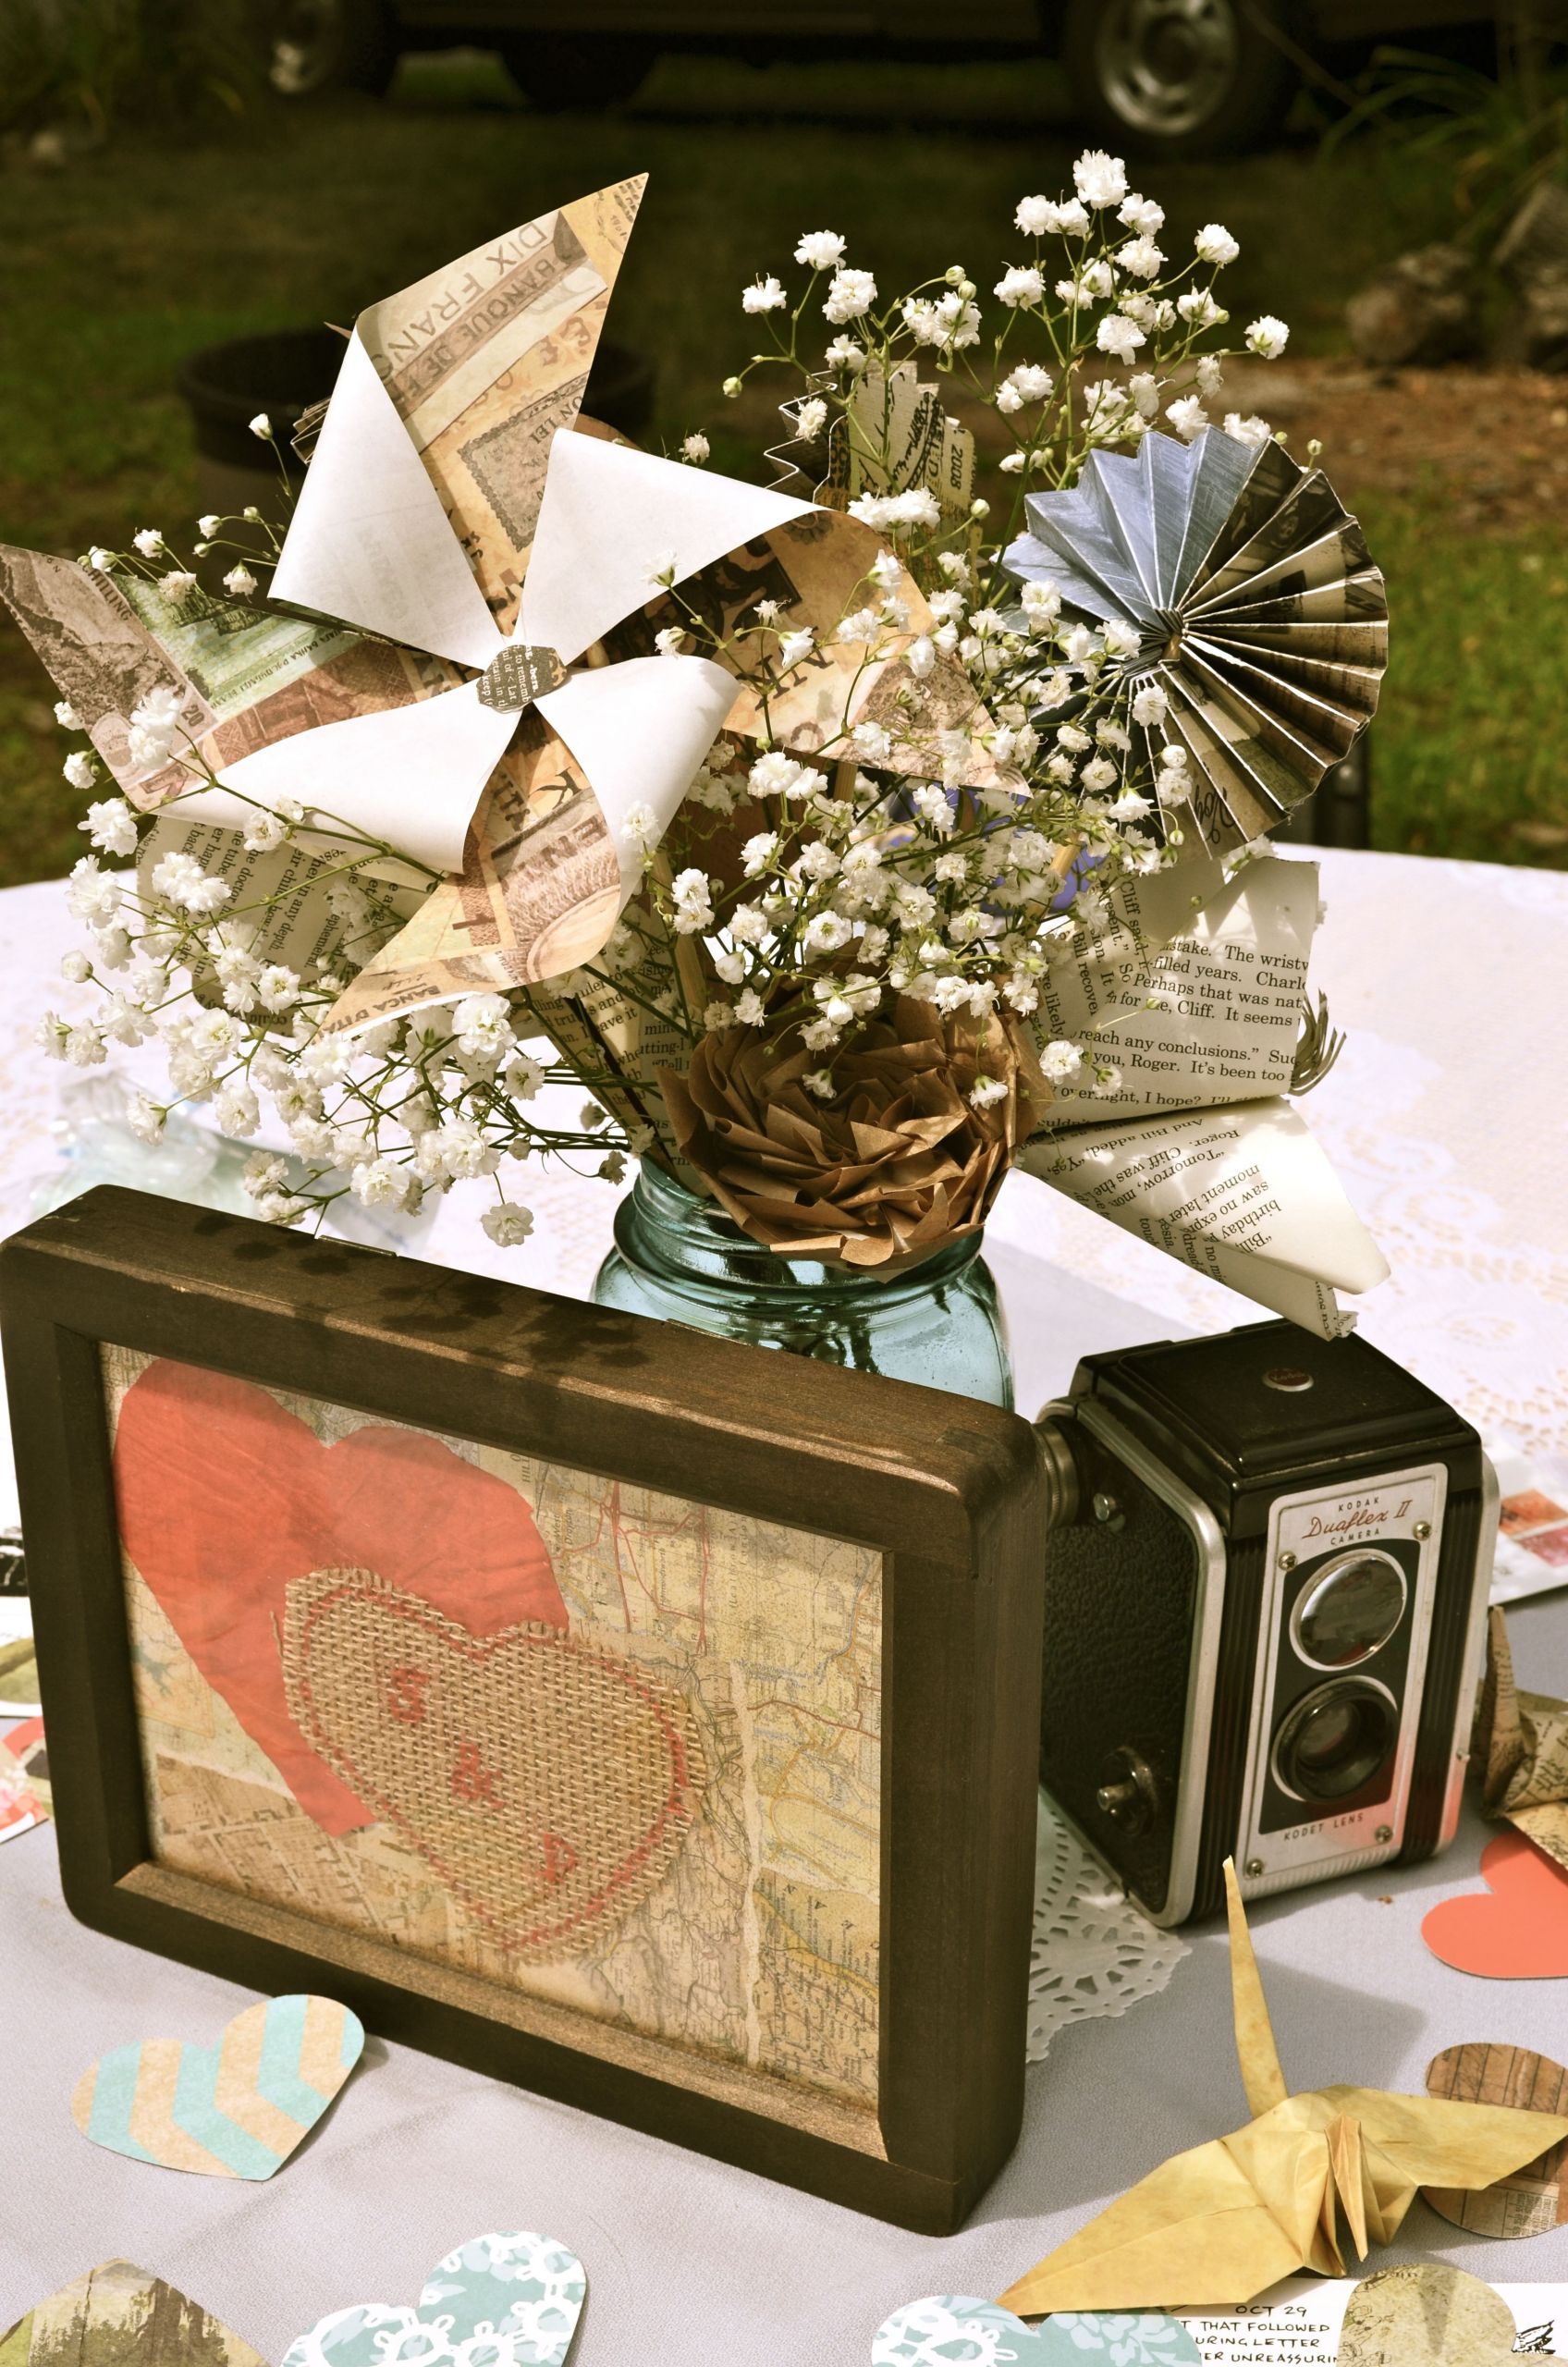 Travel Themed Wedding Centerpieces
 Travel Themed Bridal Shower by Eventsbylaurenvb